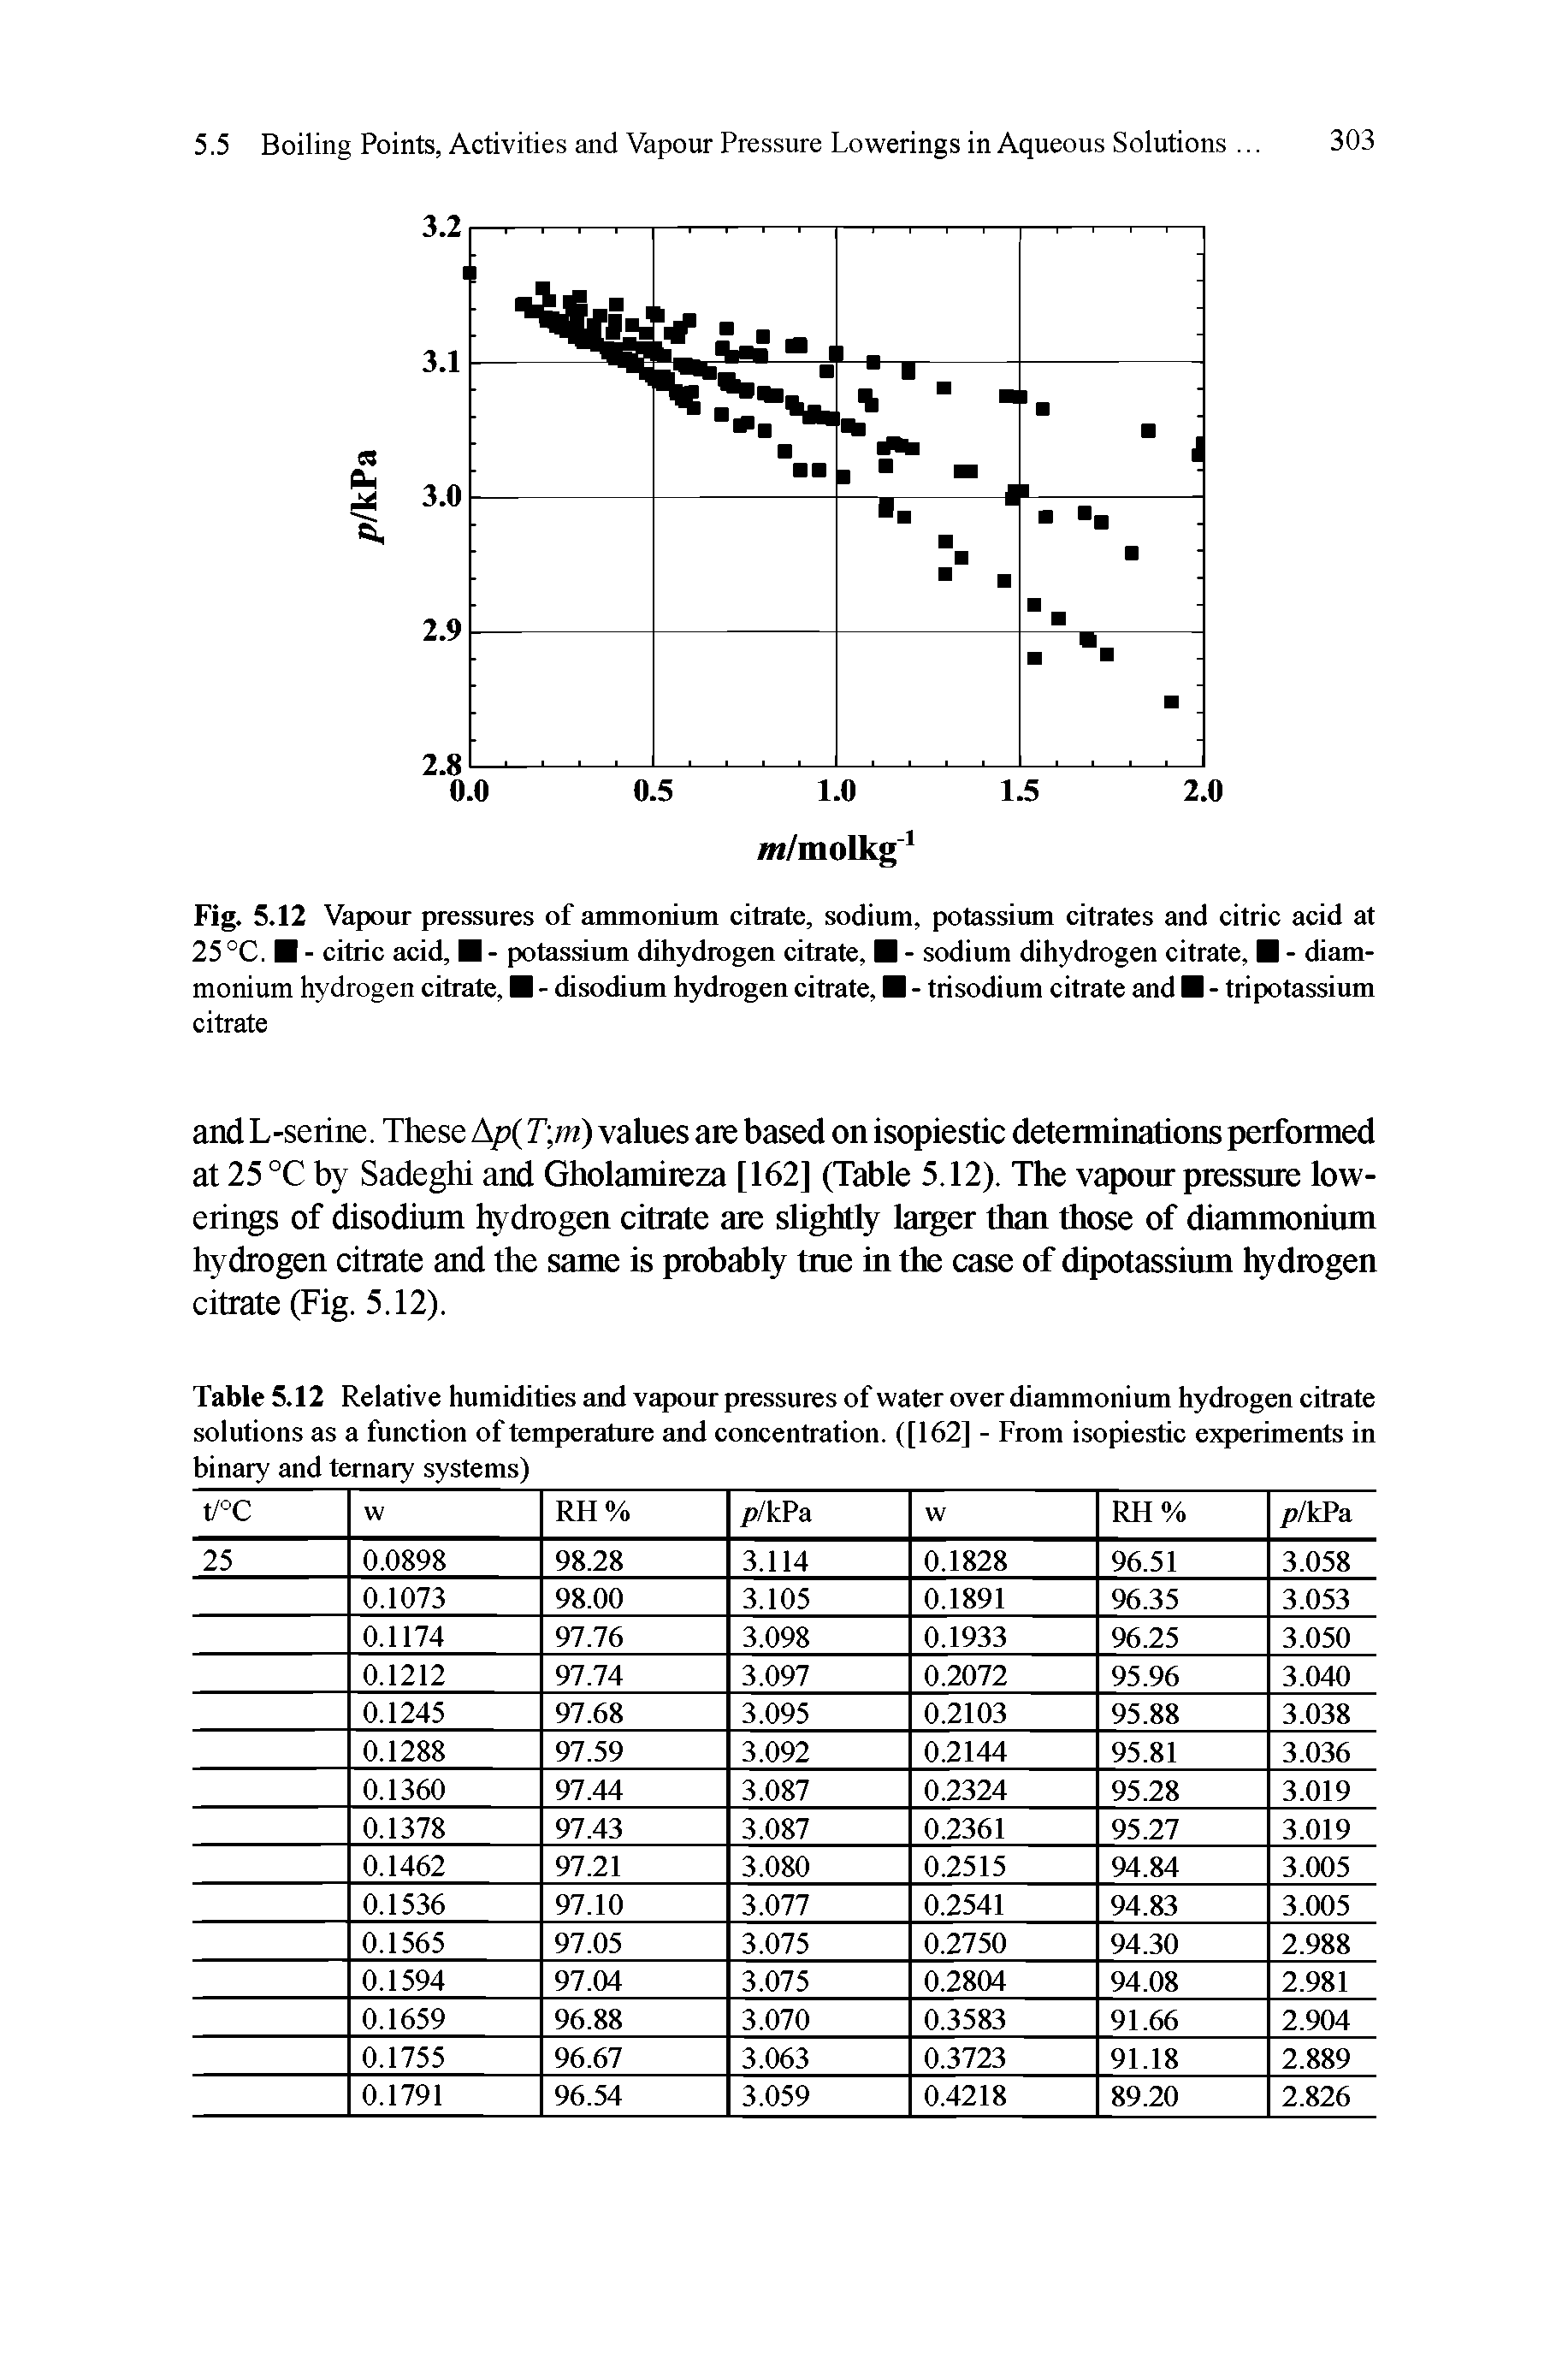 Table 5.12 Relative humidities and vapour pressures of water over diammonium hydrogen citrate solutions as a function of temperature and concentration. ([162] - From isopiestic experiments in binary and ternary systems)...